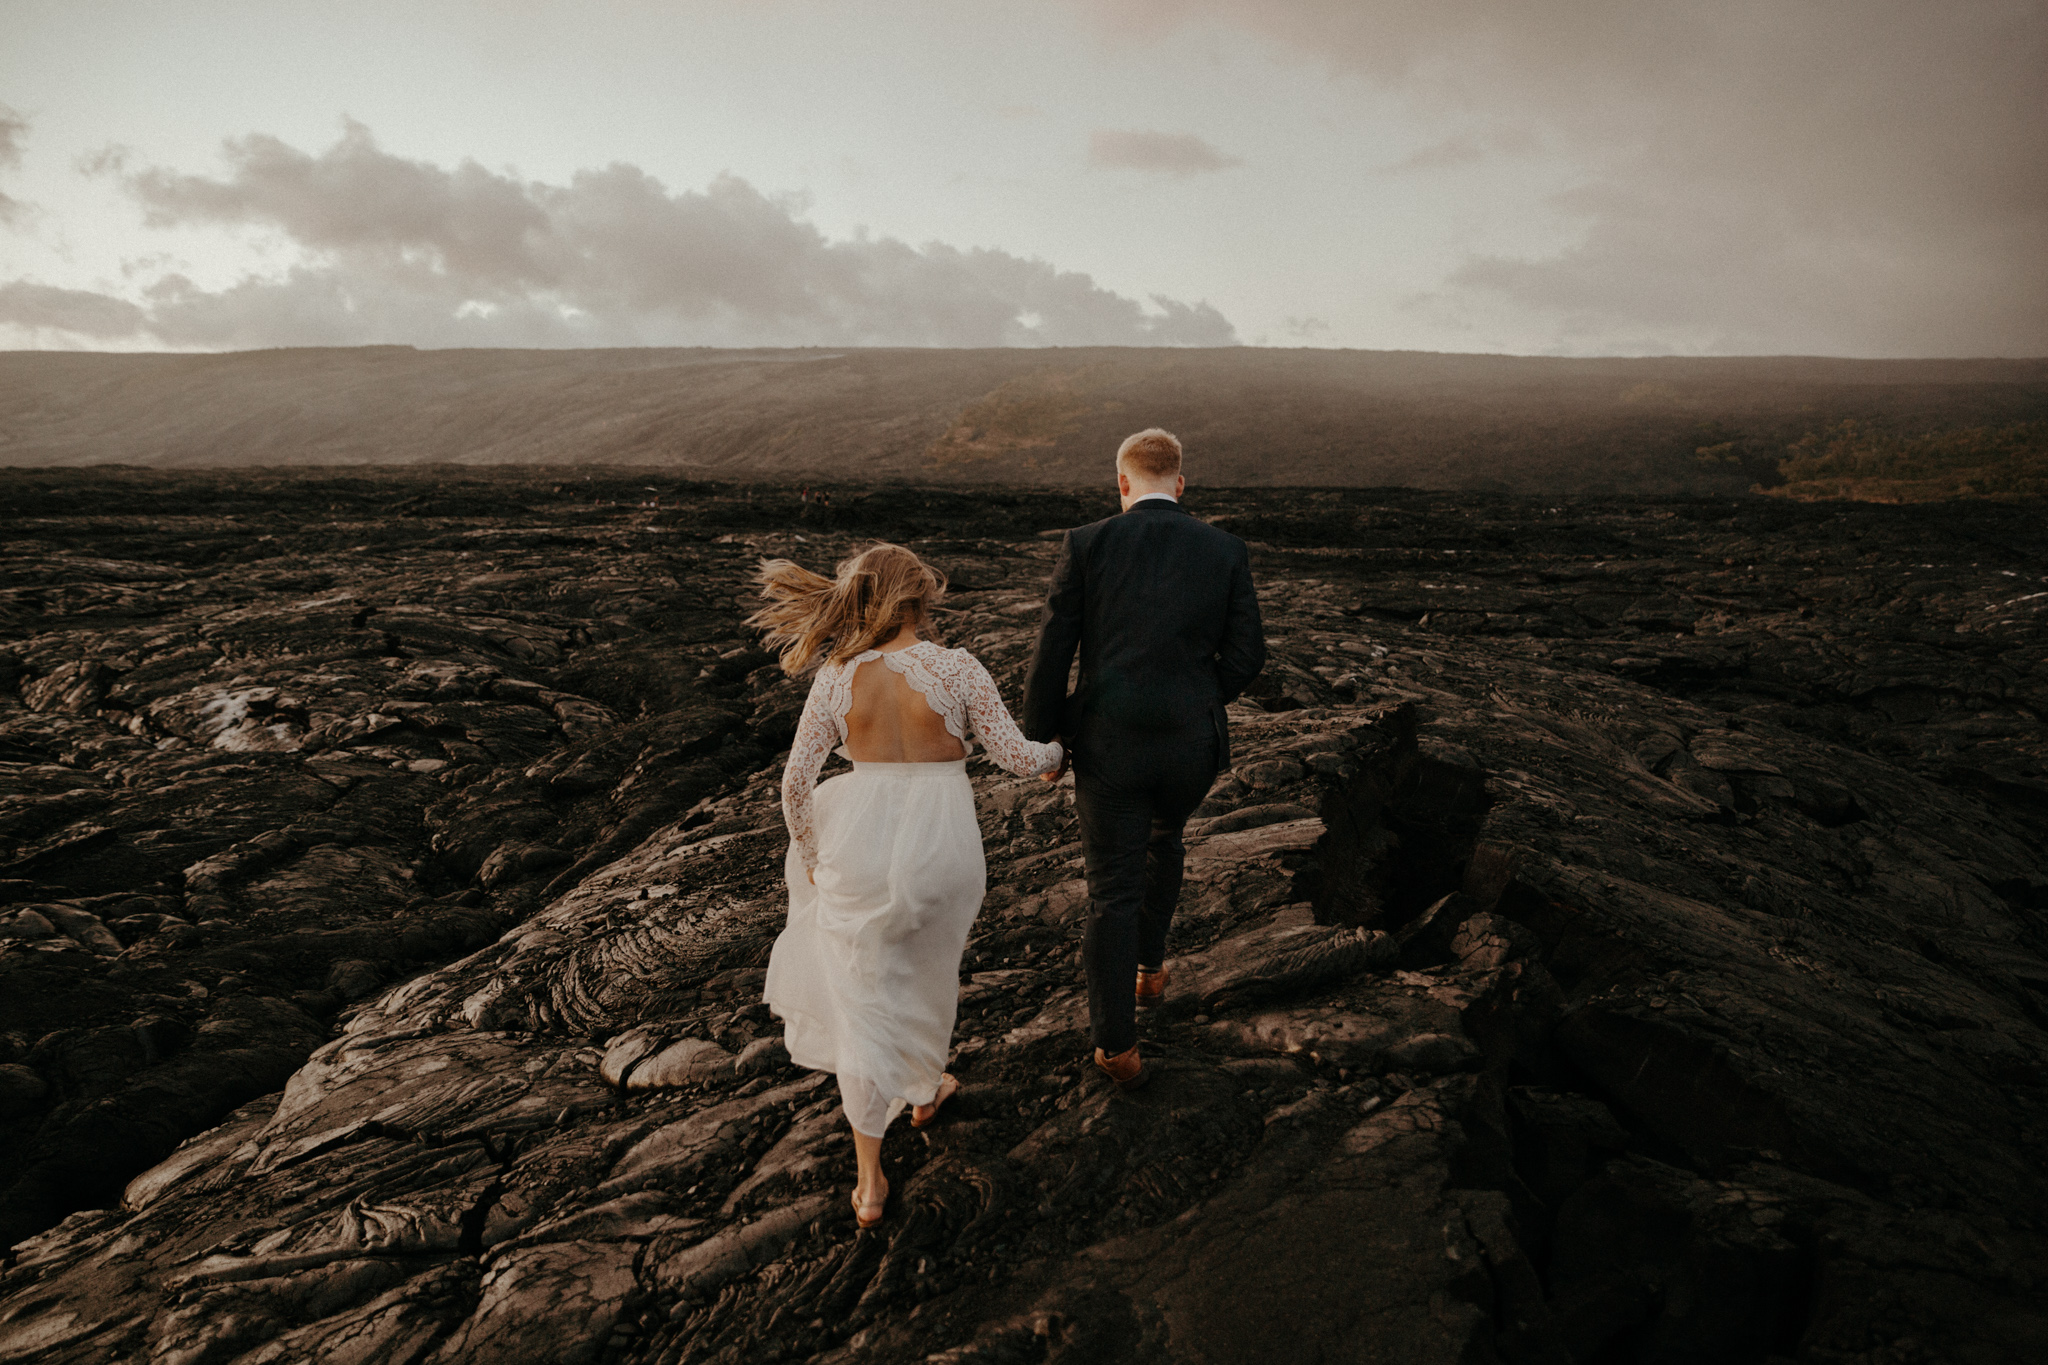 Adventurous elopement on the Big Island of Hawaii with a waterfall, a tropical jungle, and a lava field with molten lava flow. Images by Destination Wedding Photographer Victoria Selman